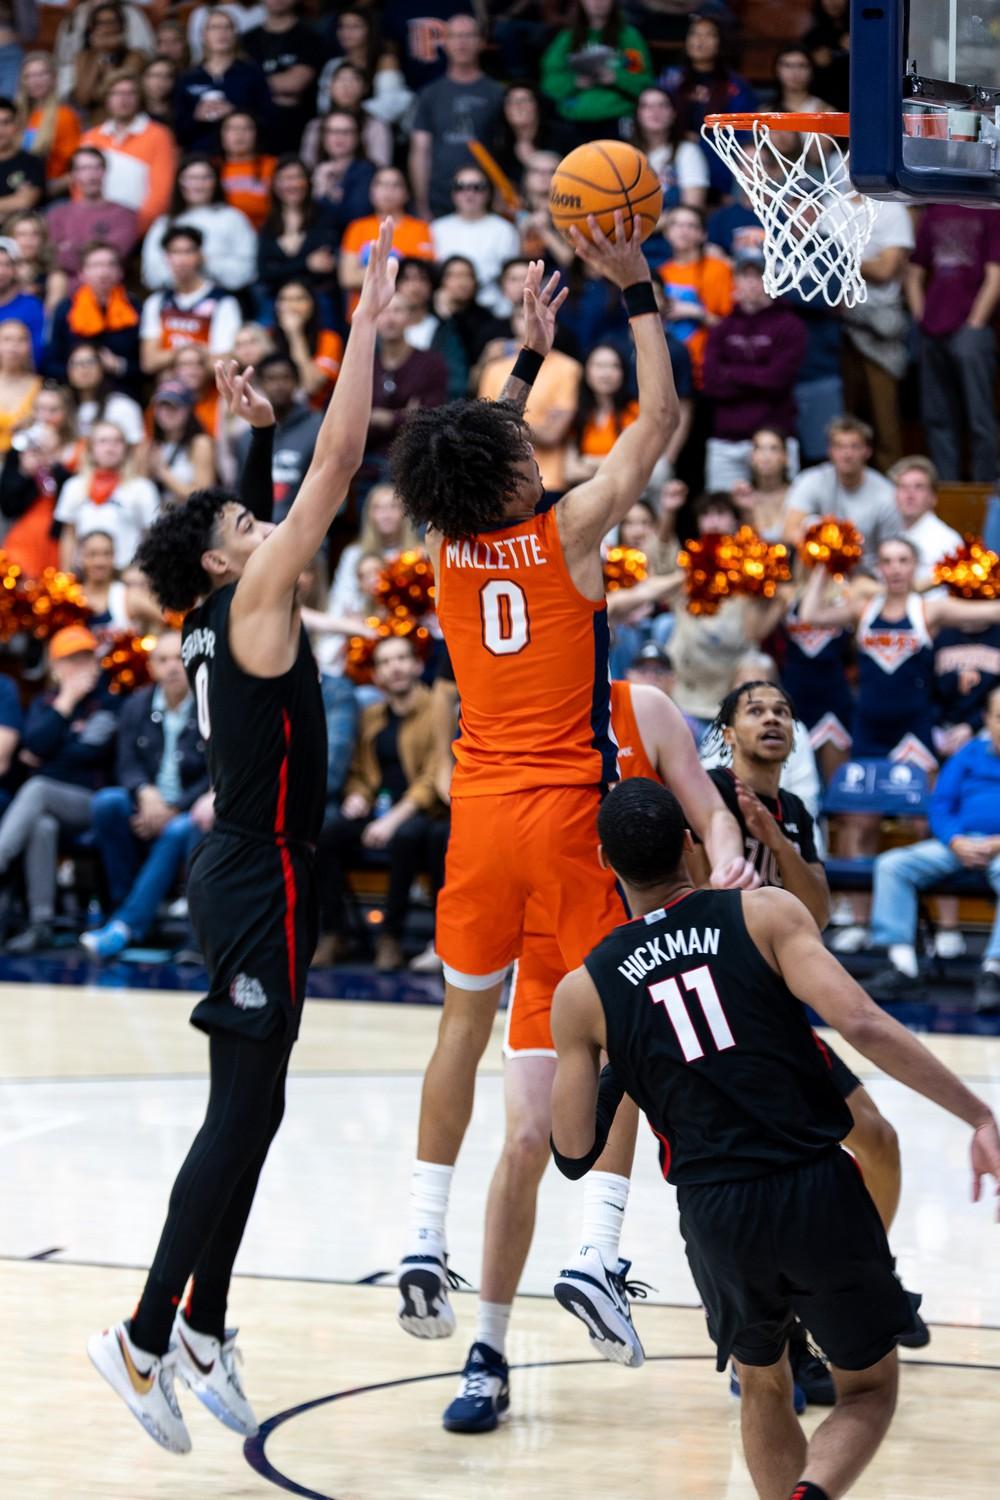 Mallette rises up for a layup versus No. 13 Gonzaga on Feb. 18, at Firestone Fieldhouse. Along with his 20 points, Mallette cashed in three 3-pointers.